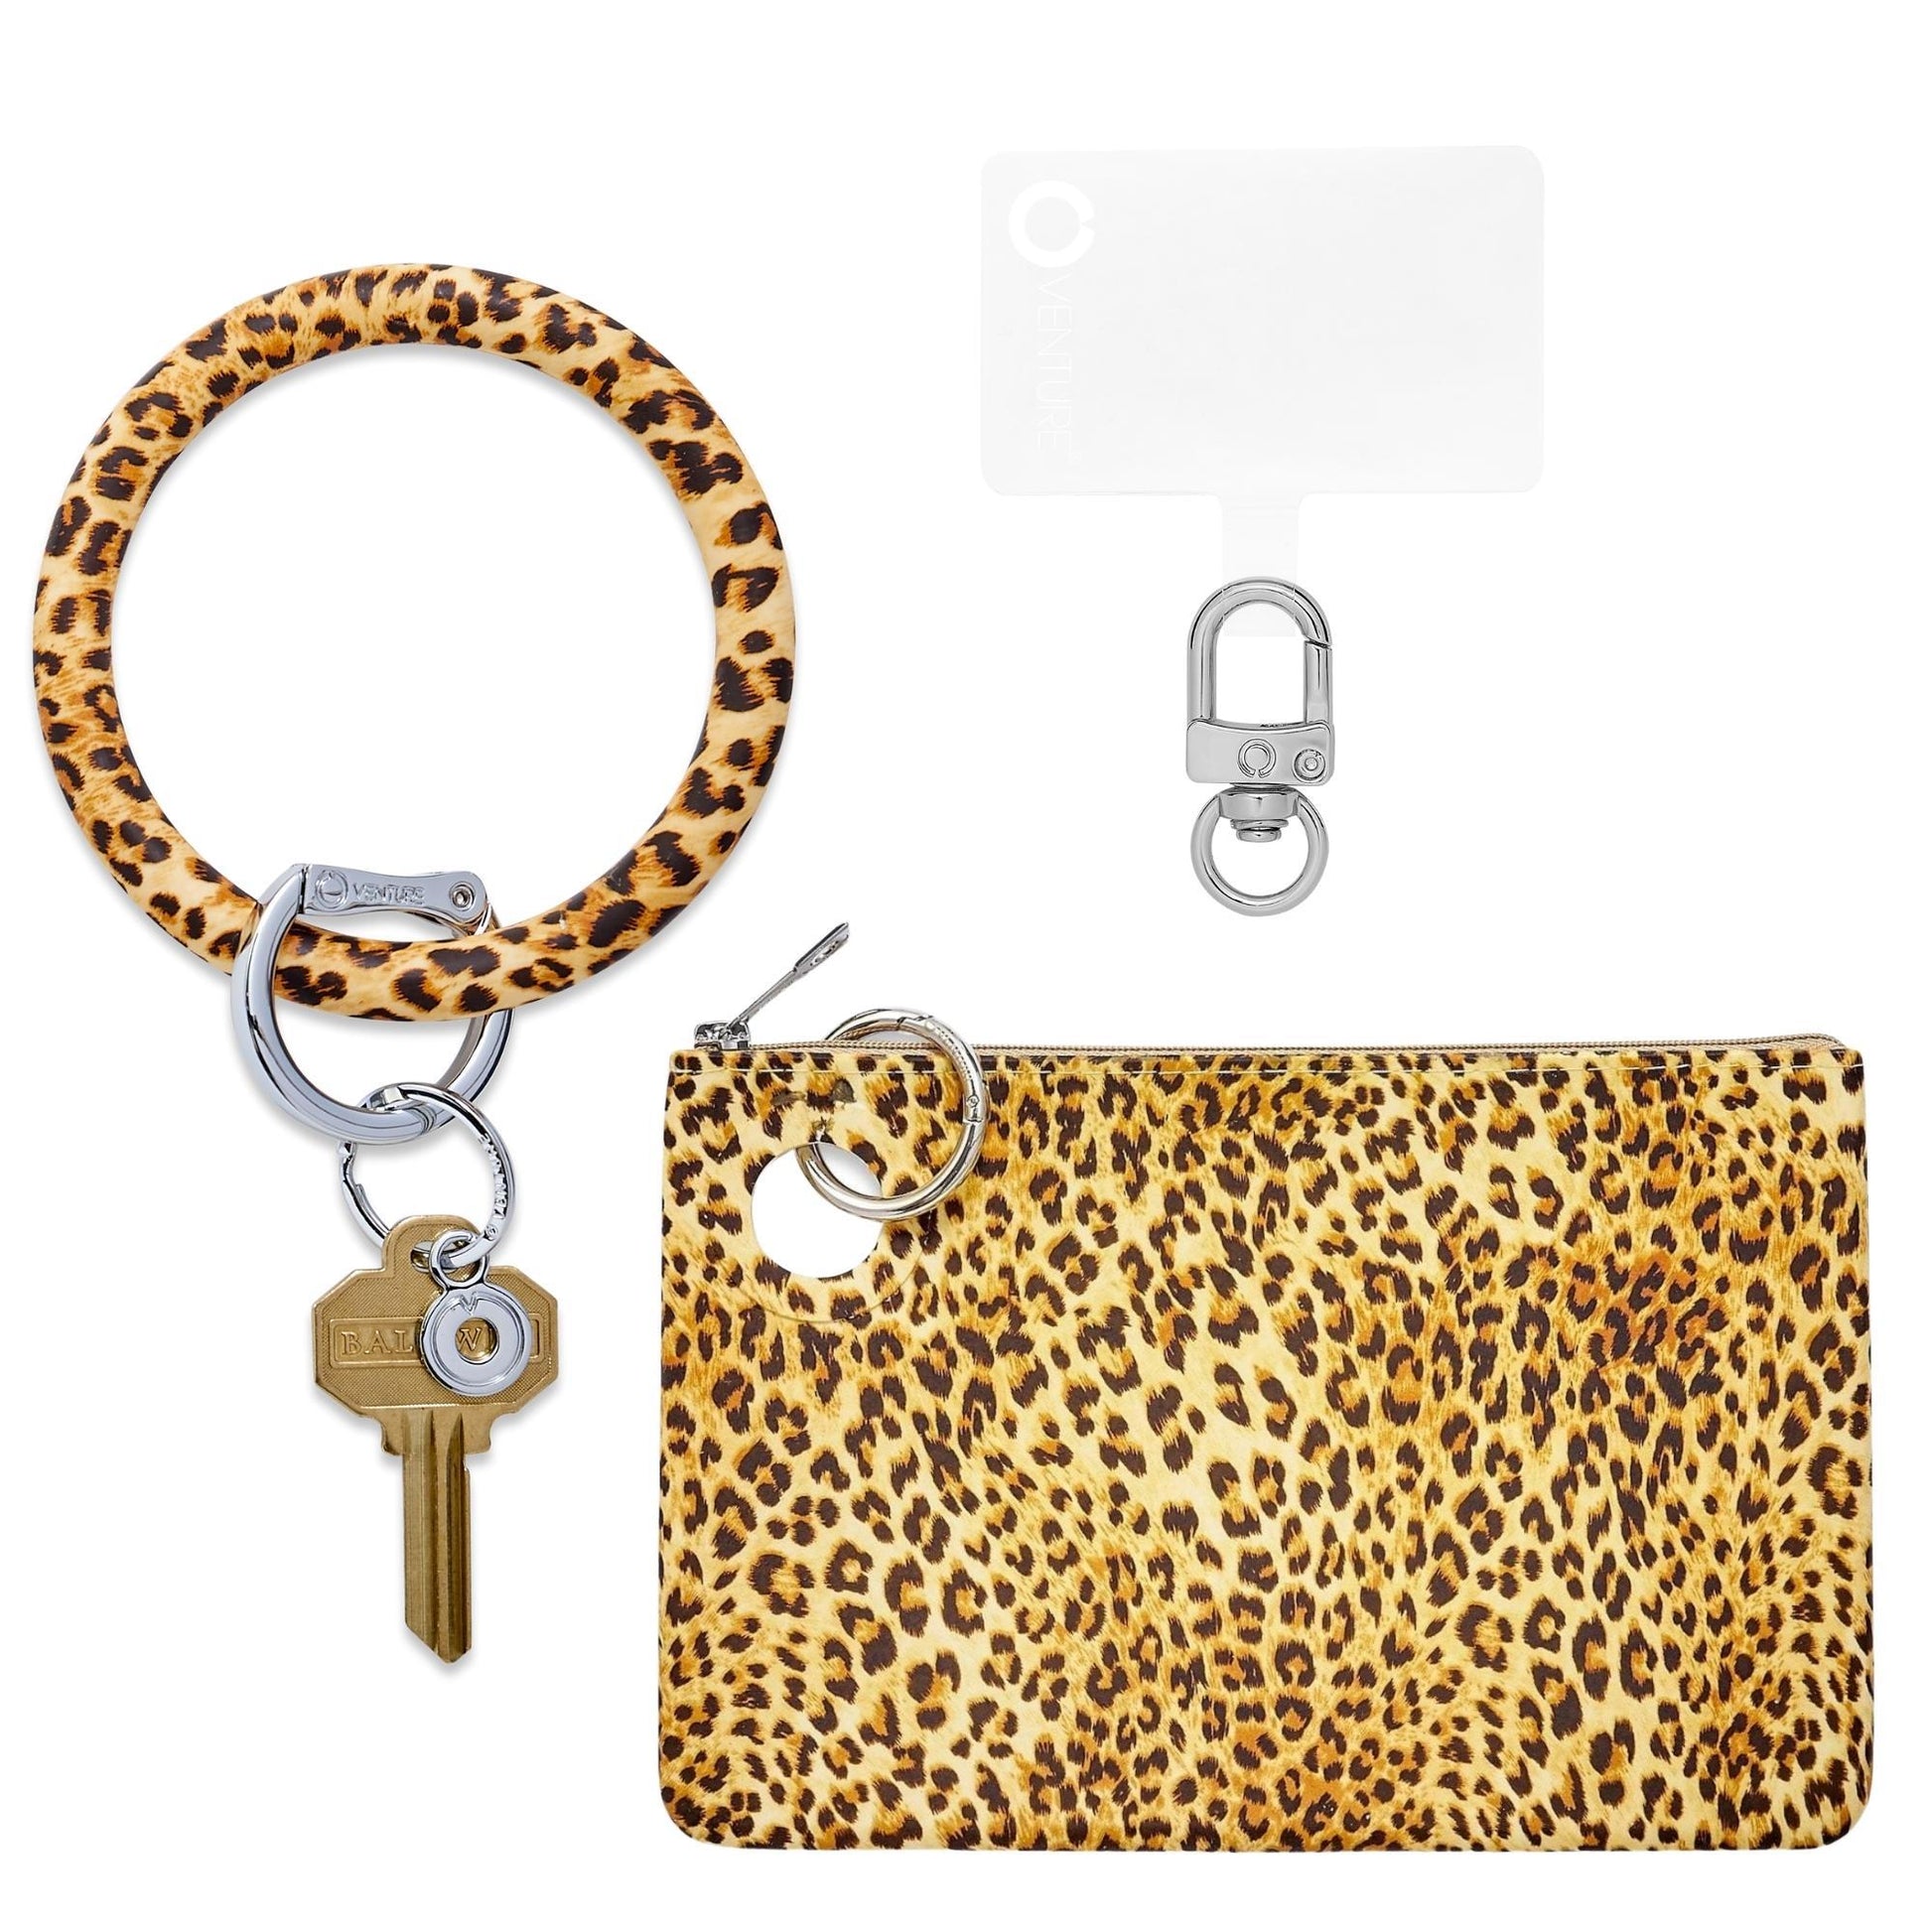 Stylish Large Pouch Wristlet with Phone Holder in cheetah print.